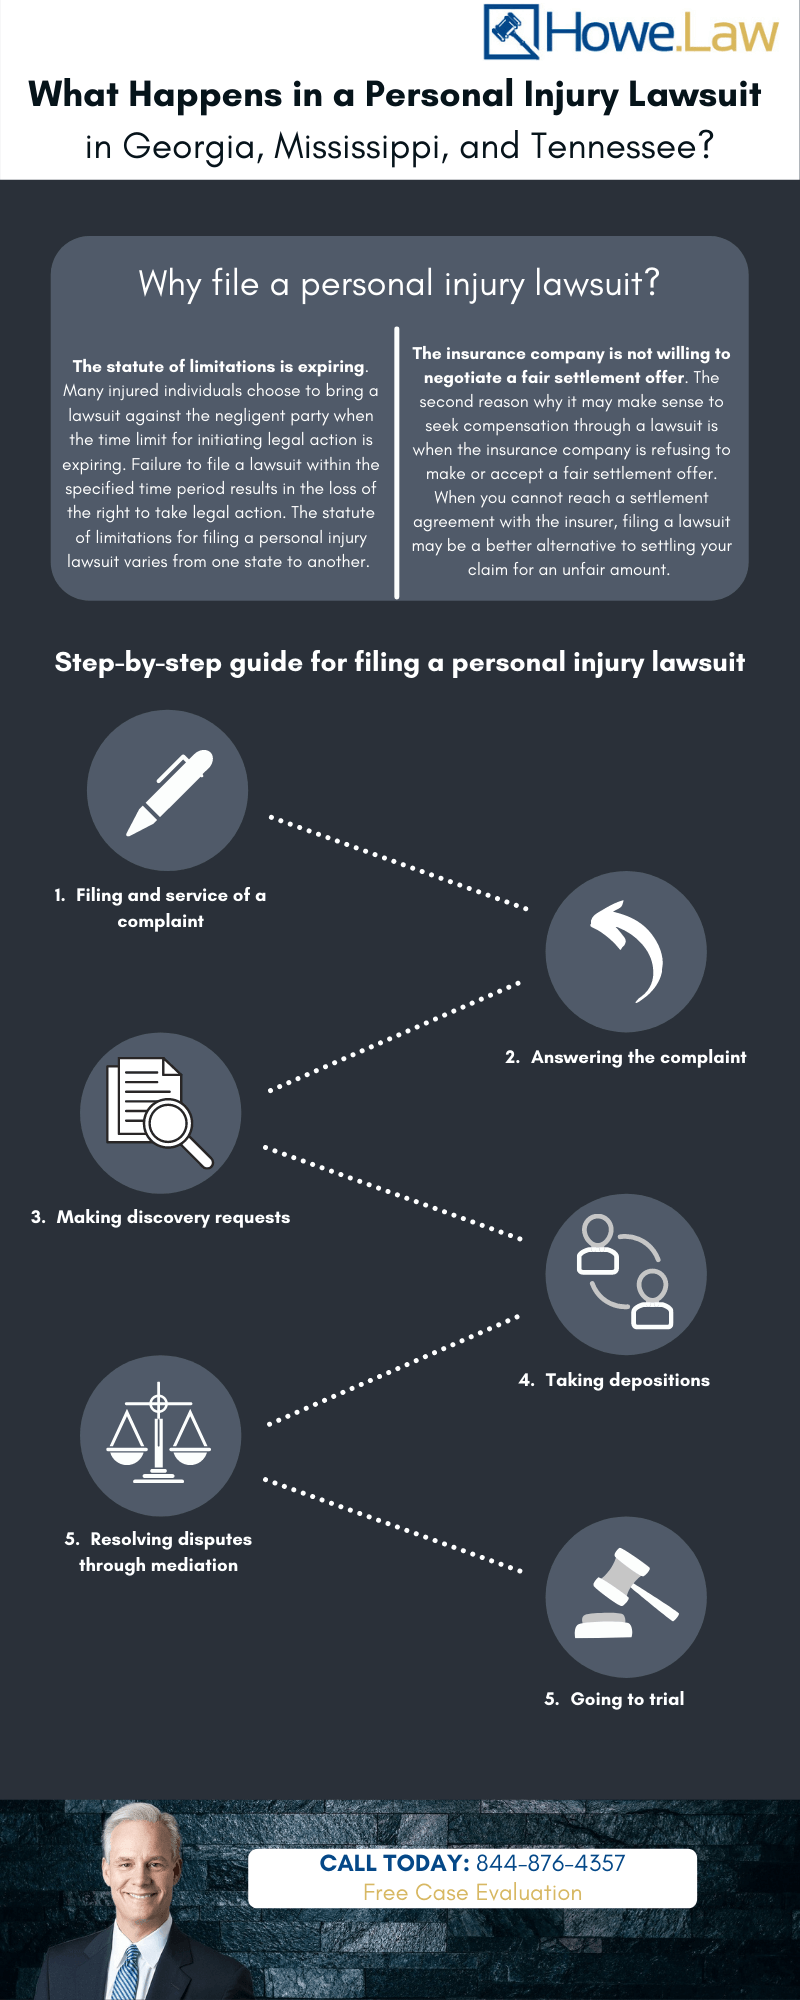 What Happens in a Personal Injury Lawsuit in Georgia, Mississippi, and Tennessee